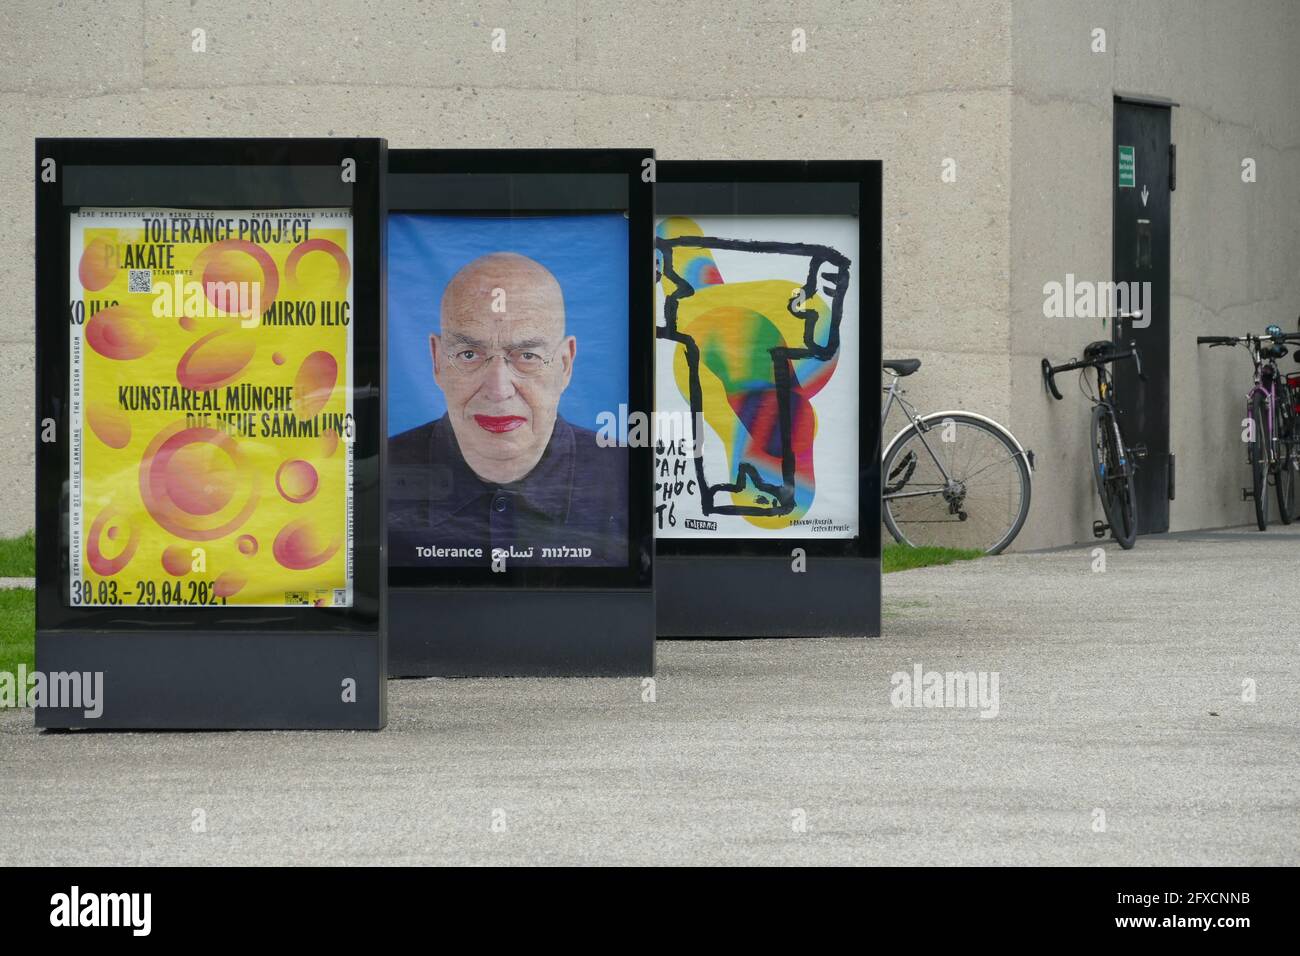 Tolerance Poster Project by Mirko Ilic takes place in Munich. Here behind glass in front of restaured old Pinakothek Munich. 29.03.-30.04.21. Stock Photo